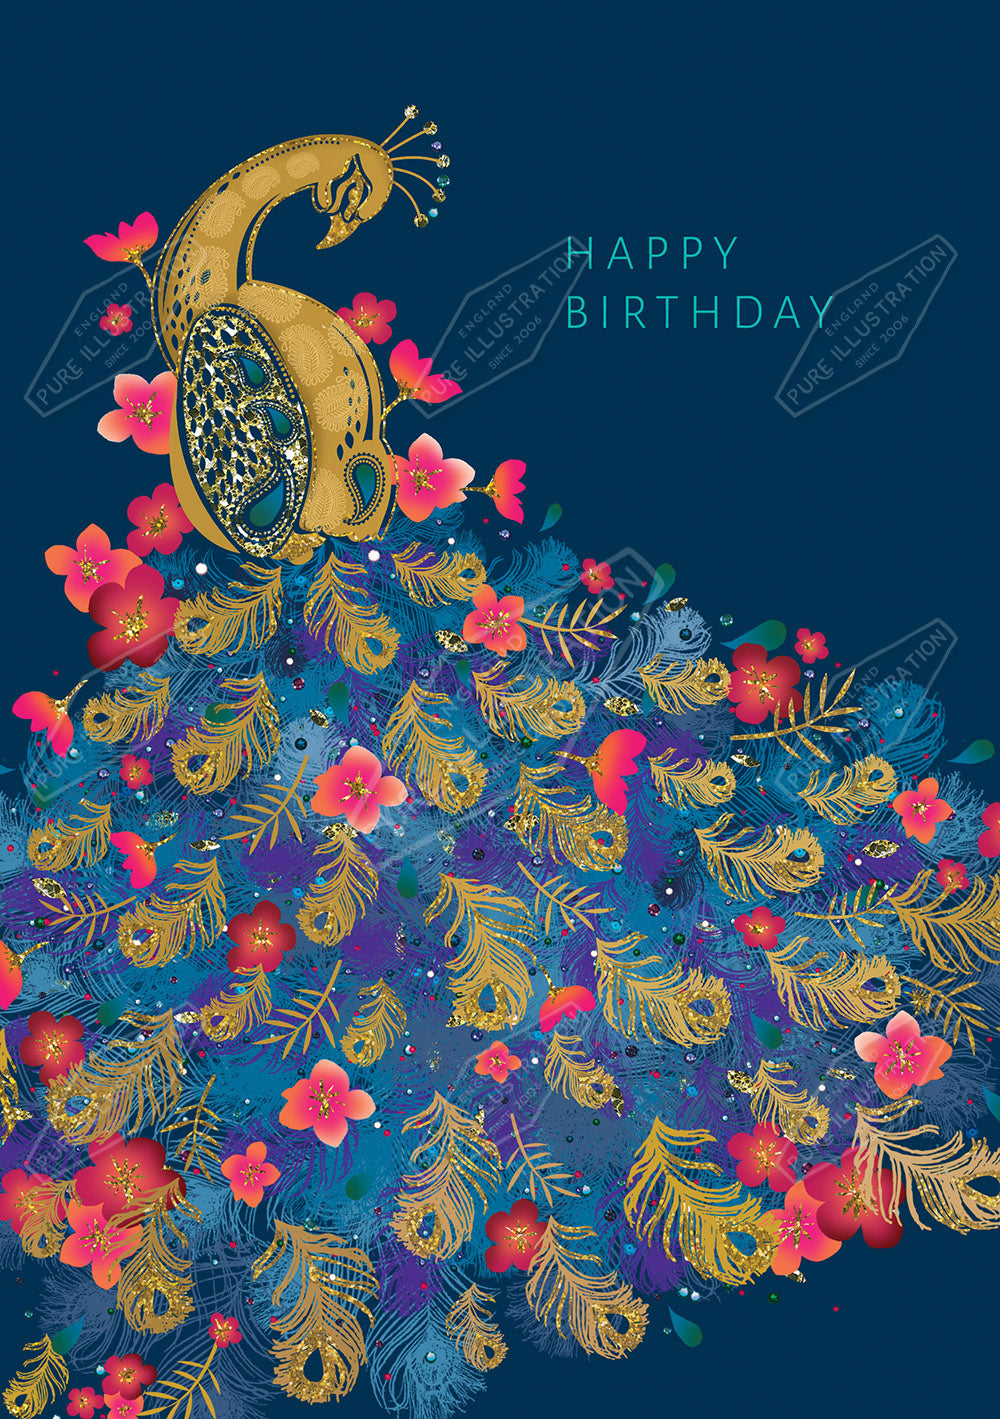 00033194KSP- Kerry Spurling is represented by Pure Art Licensing Agency - Birthday Greeting Card Design